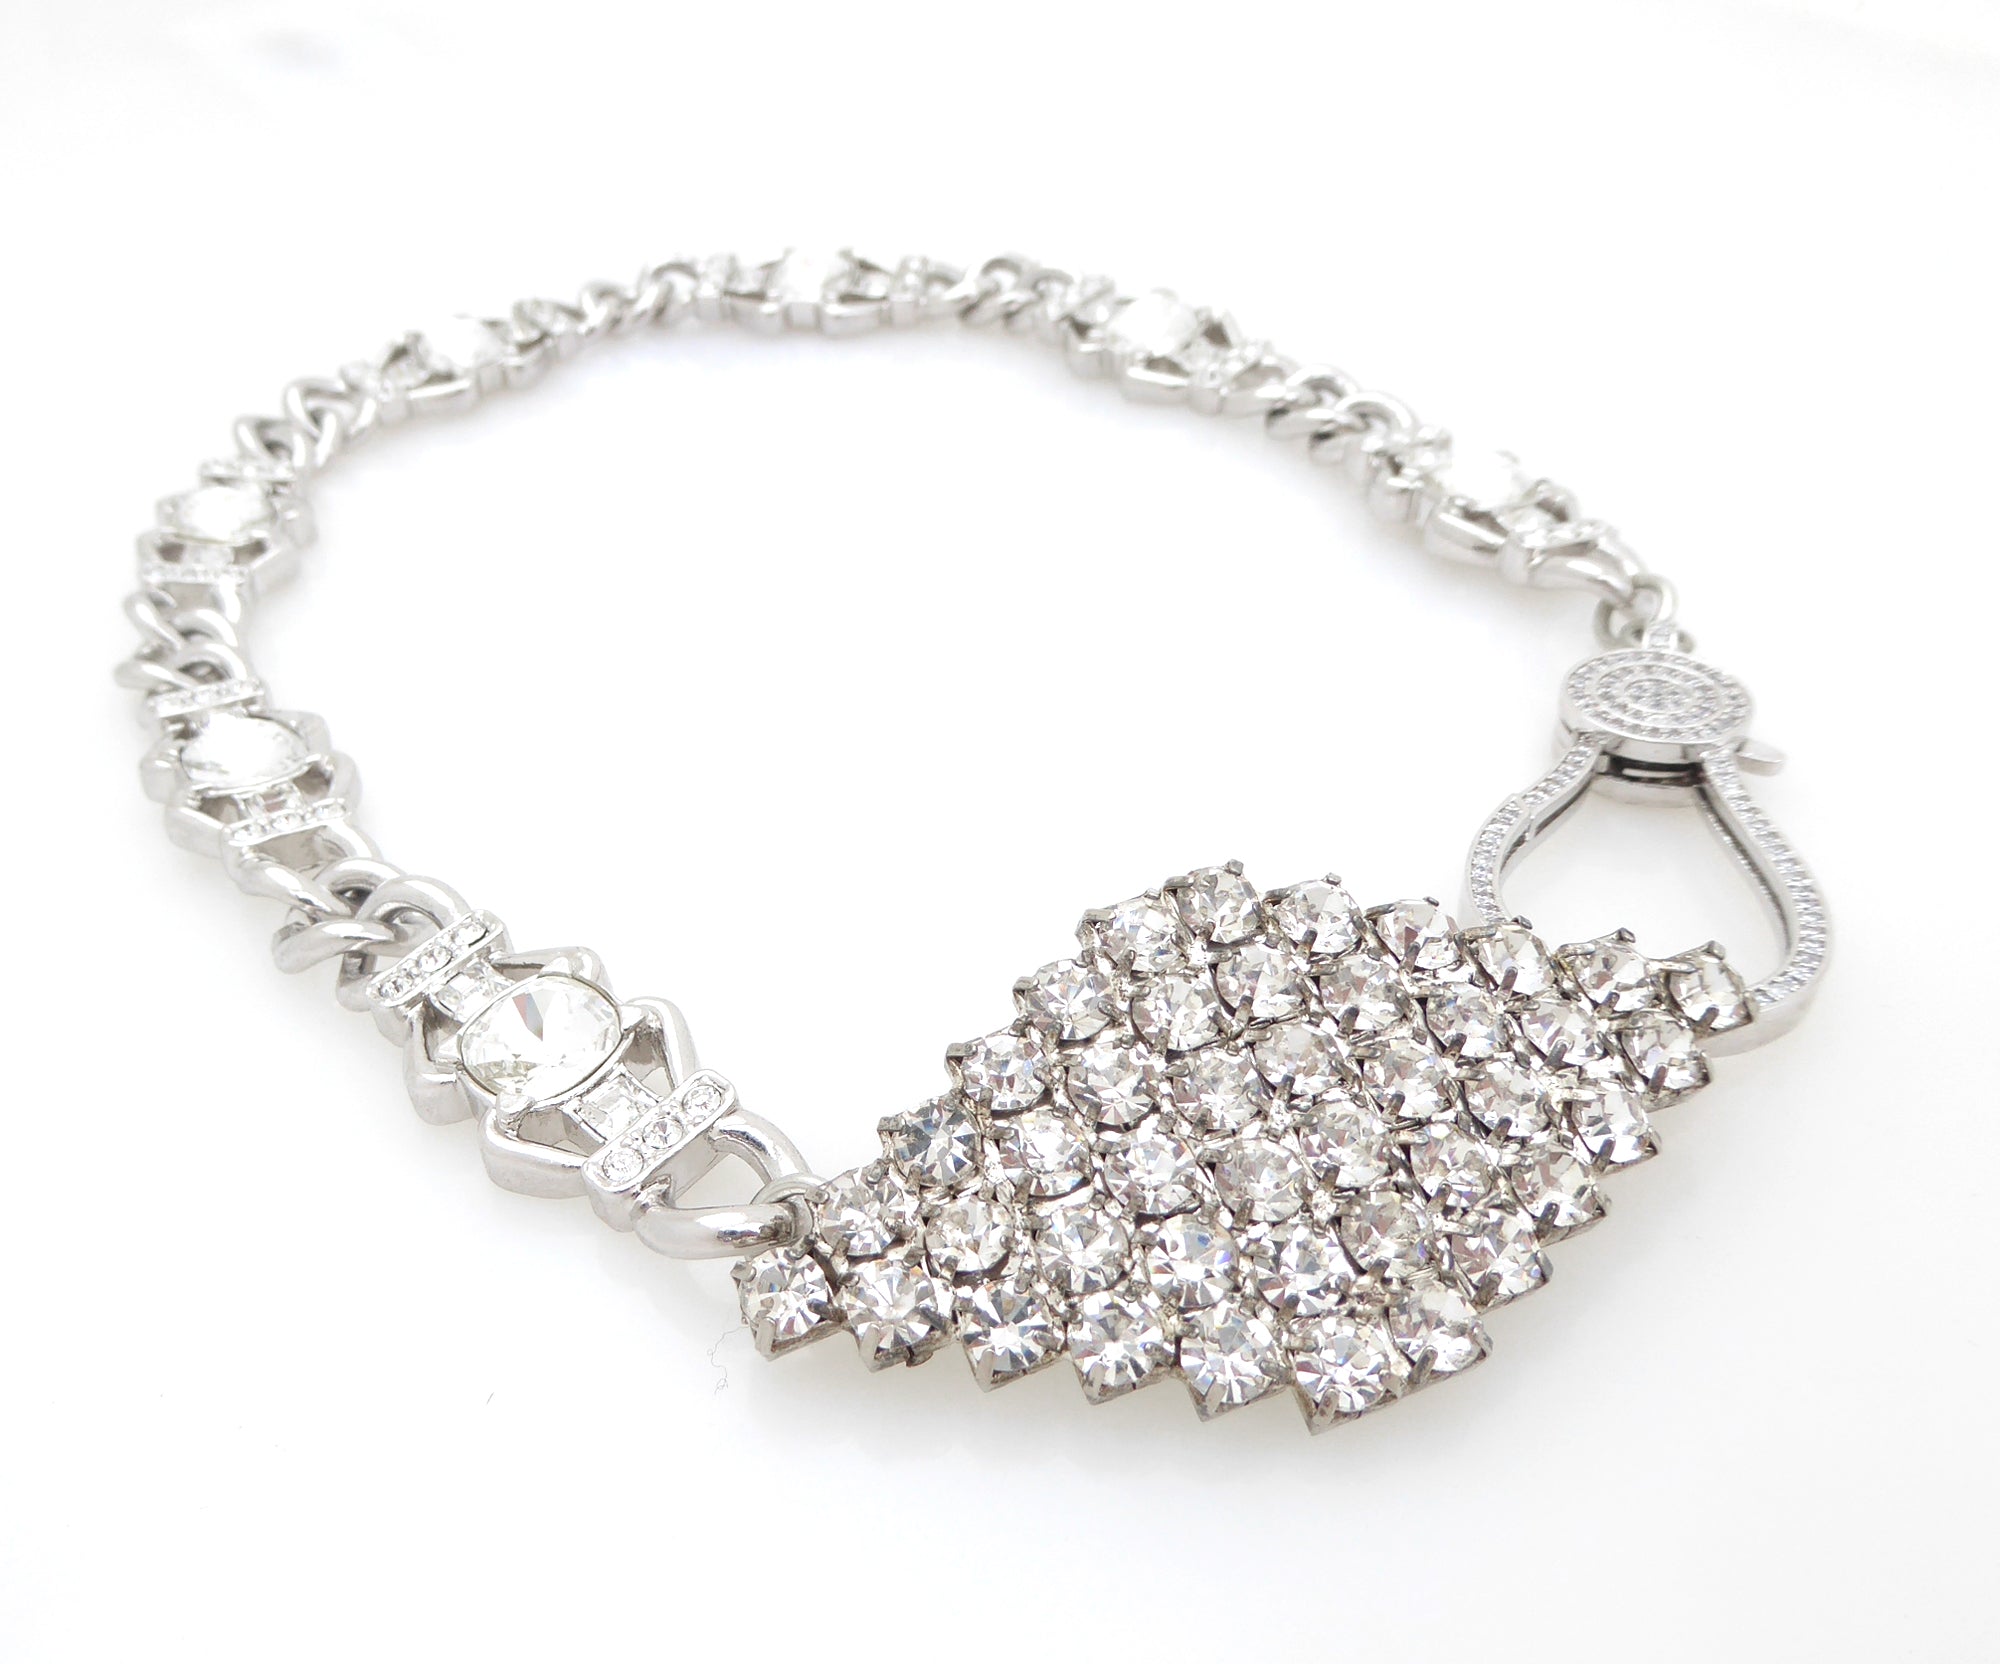 Ghiaccio silver rhinestone link and clasp necklace by Jenny Dayco 2